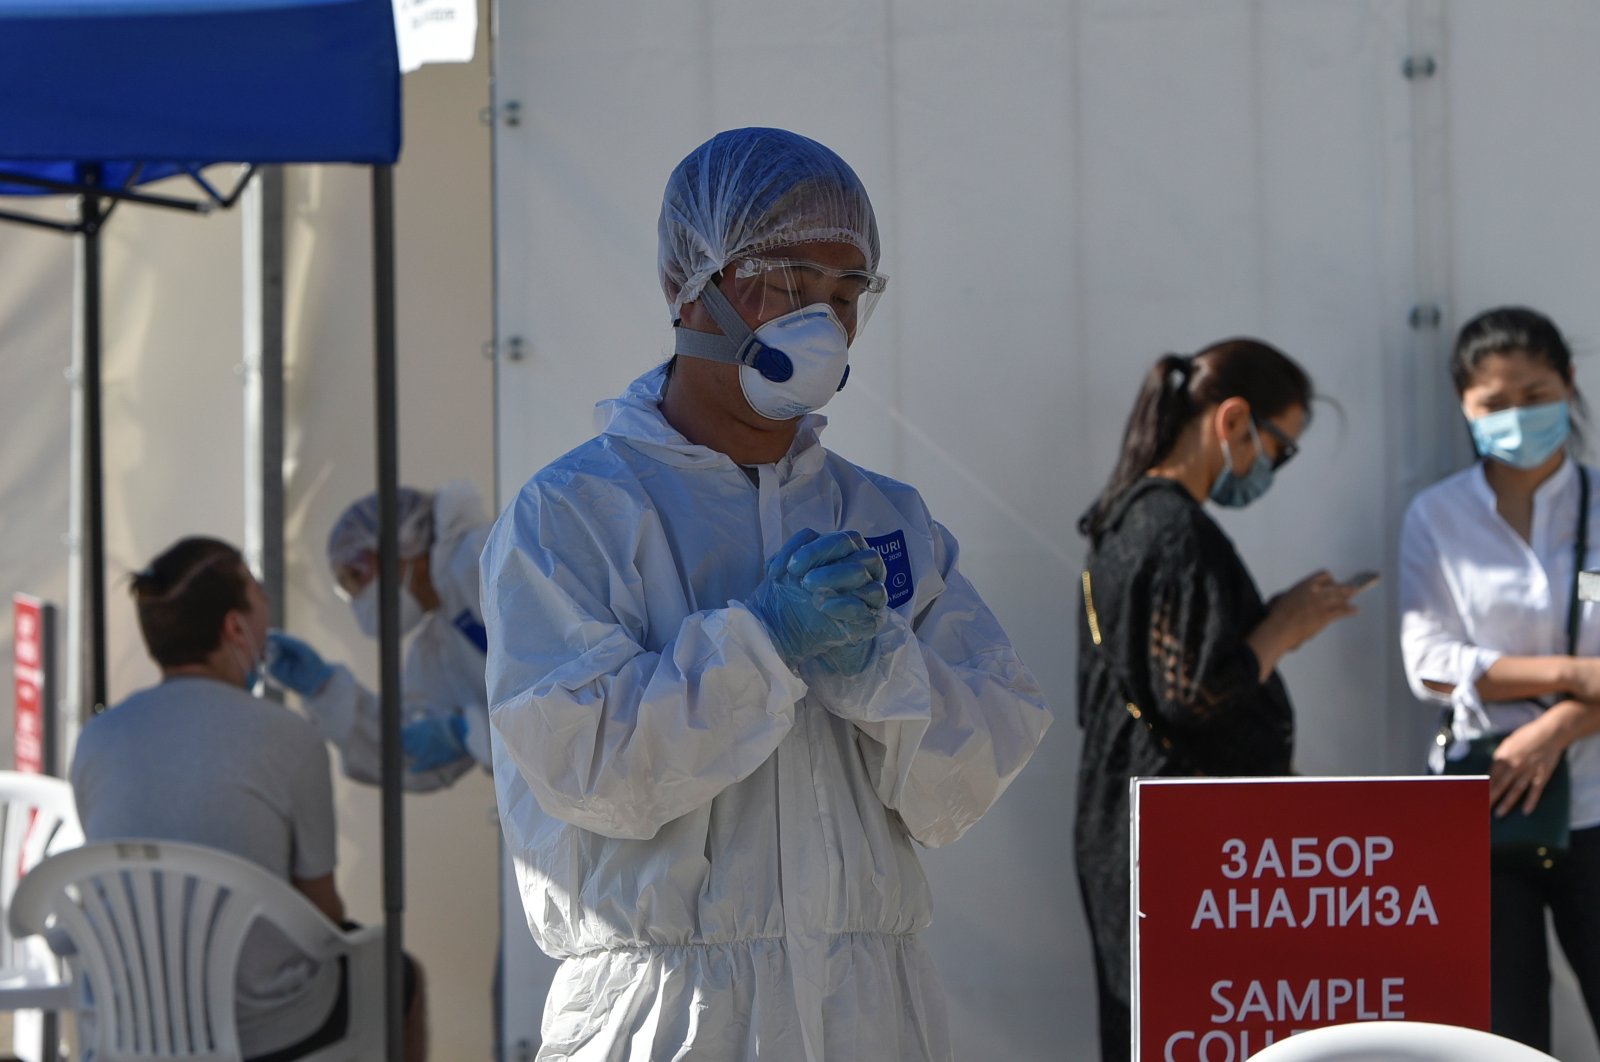 Medical specialists wearing protective equipment work at the coronavirus disease testing facility, Almaty, July 8, 2020. (REUTERS Photo)